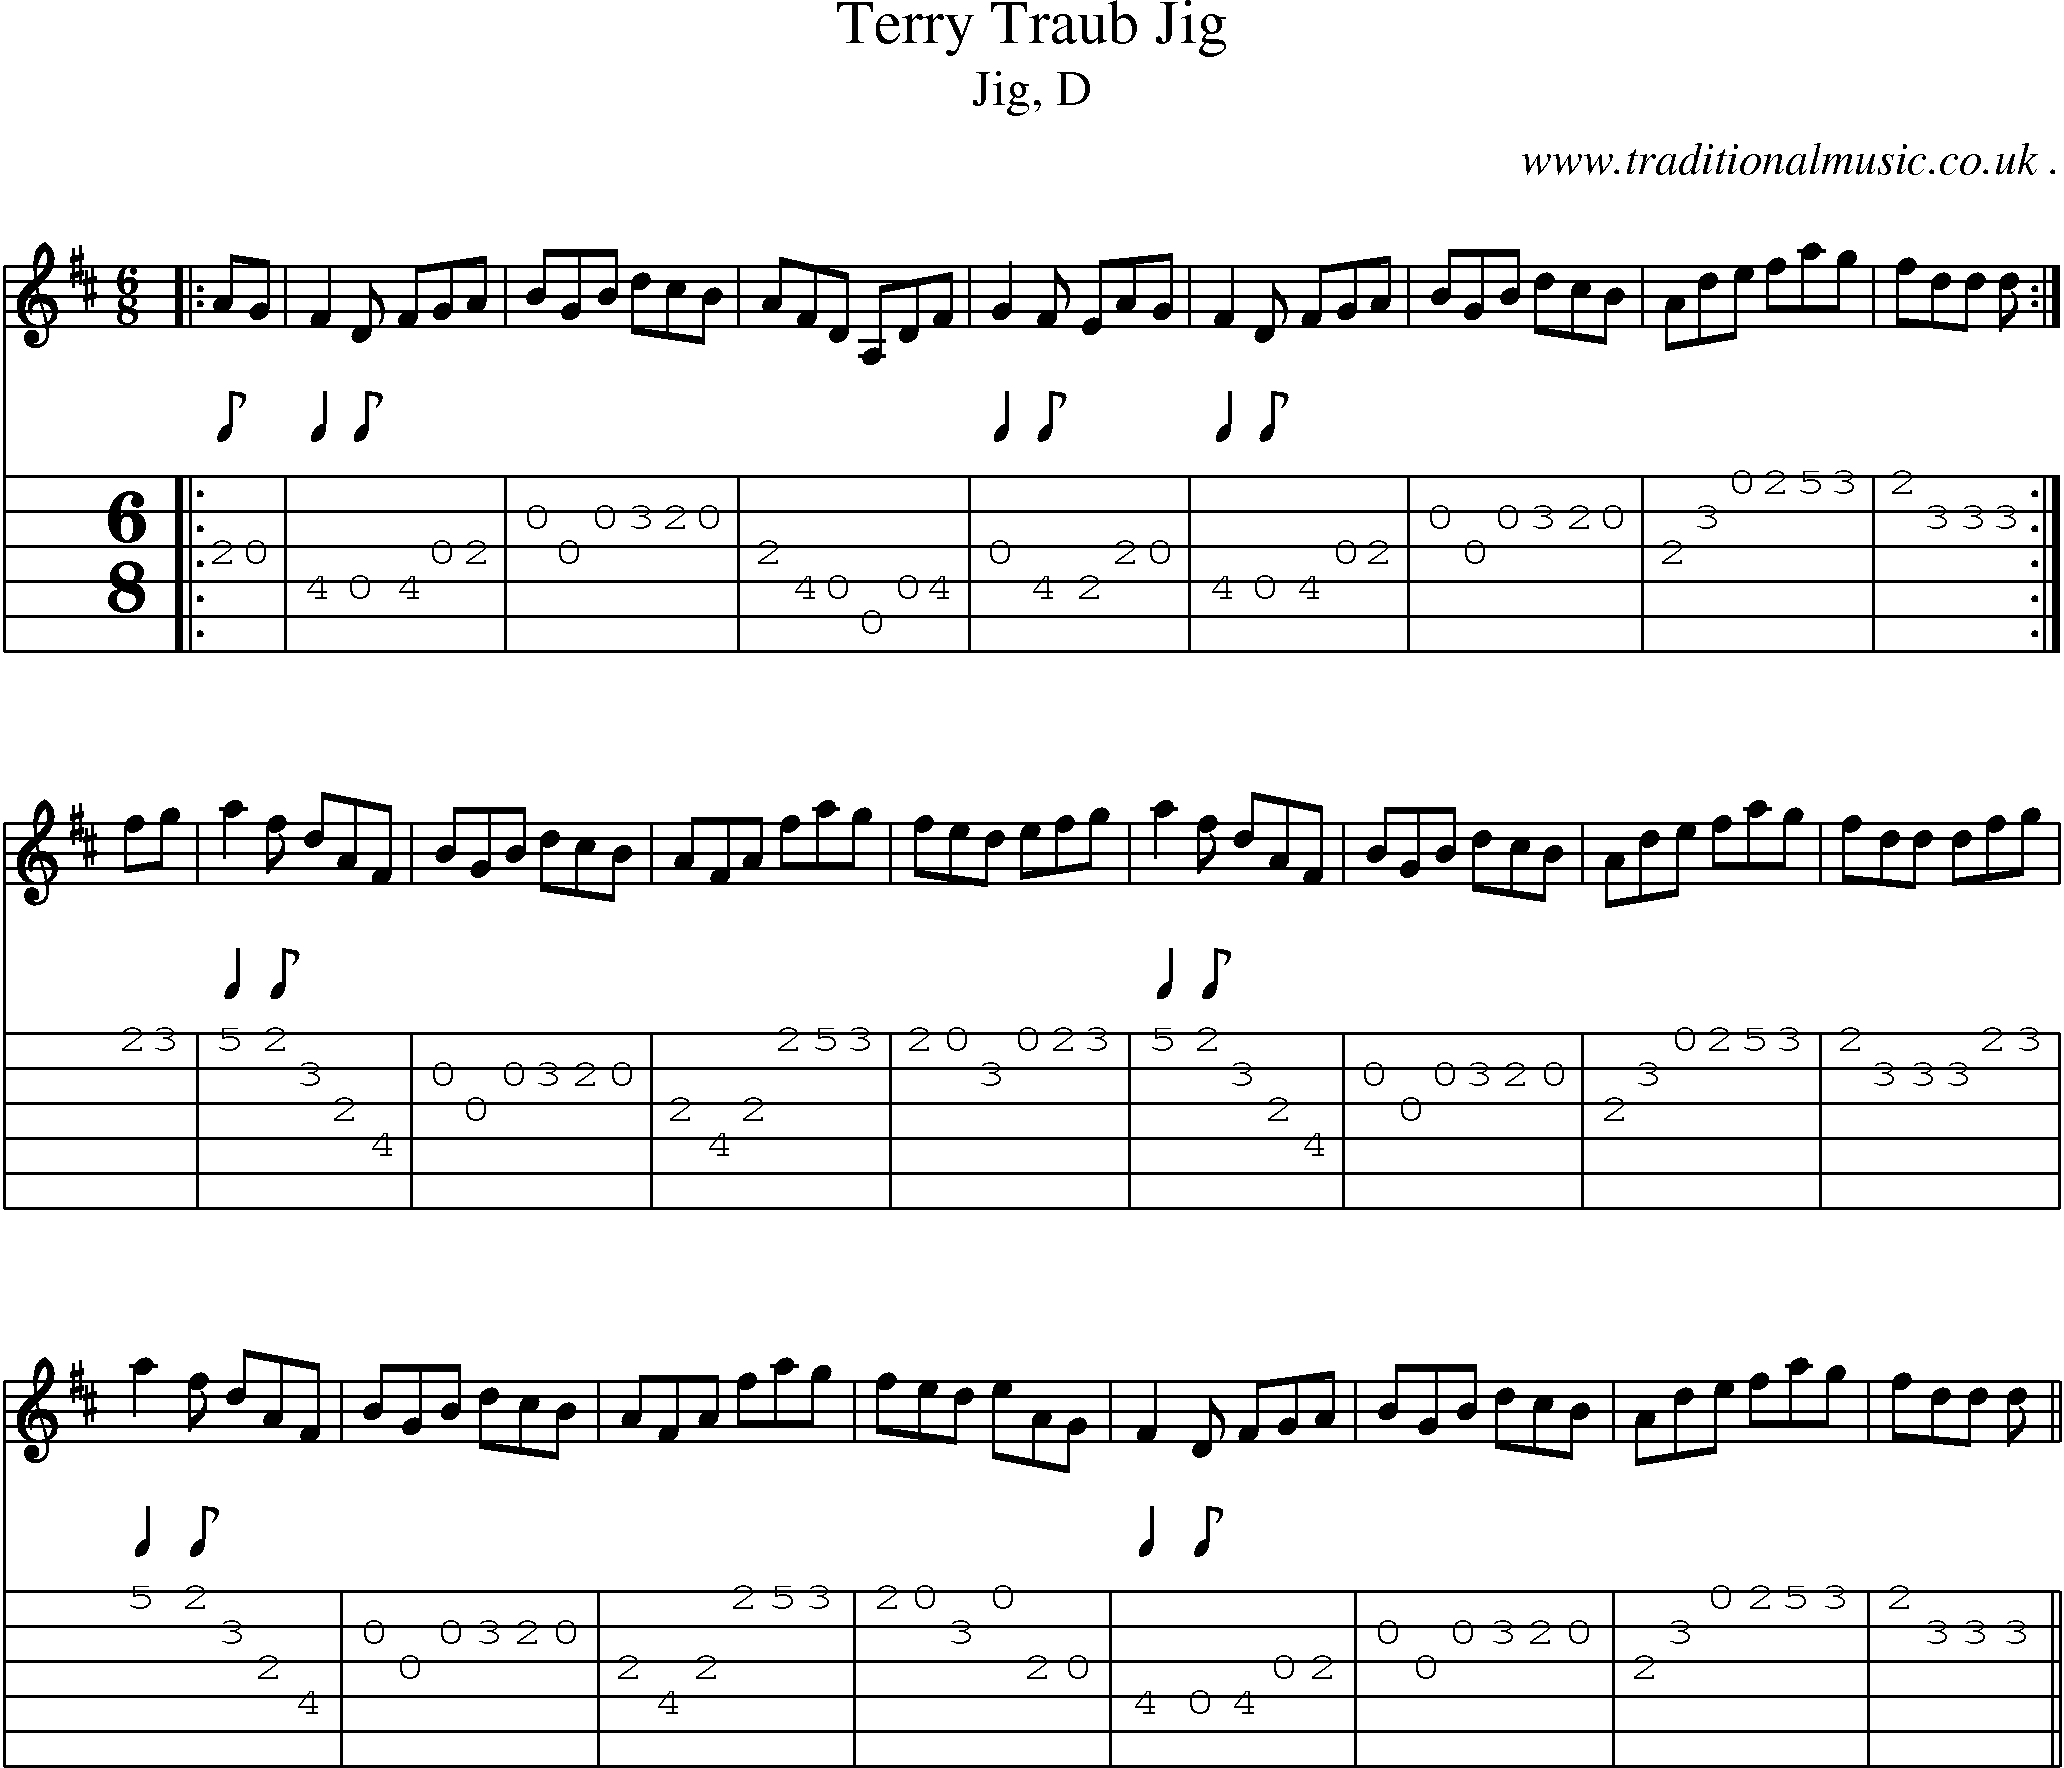 Sheet-music  score, Chords and Guitar Tabs for Terry Traub Jig